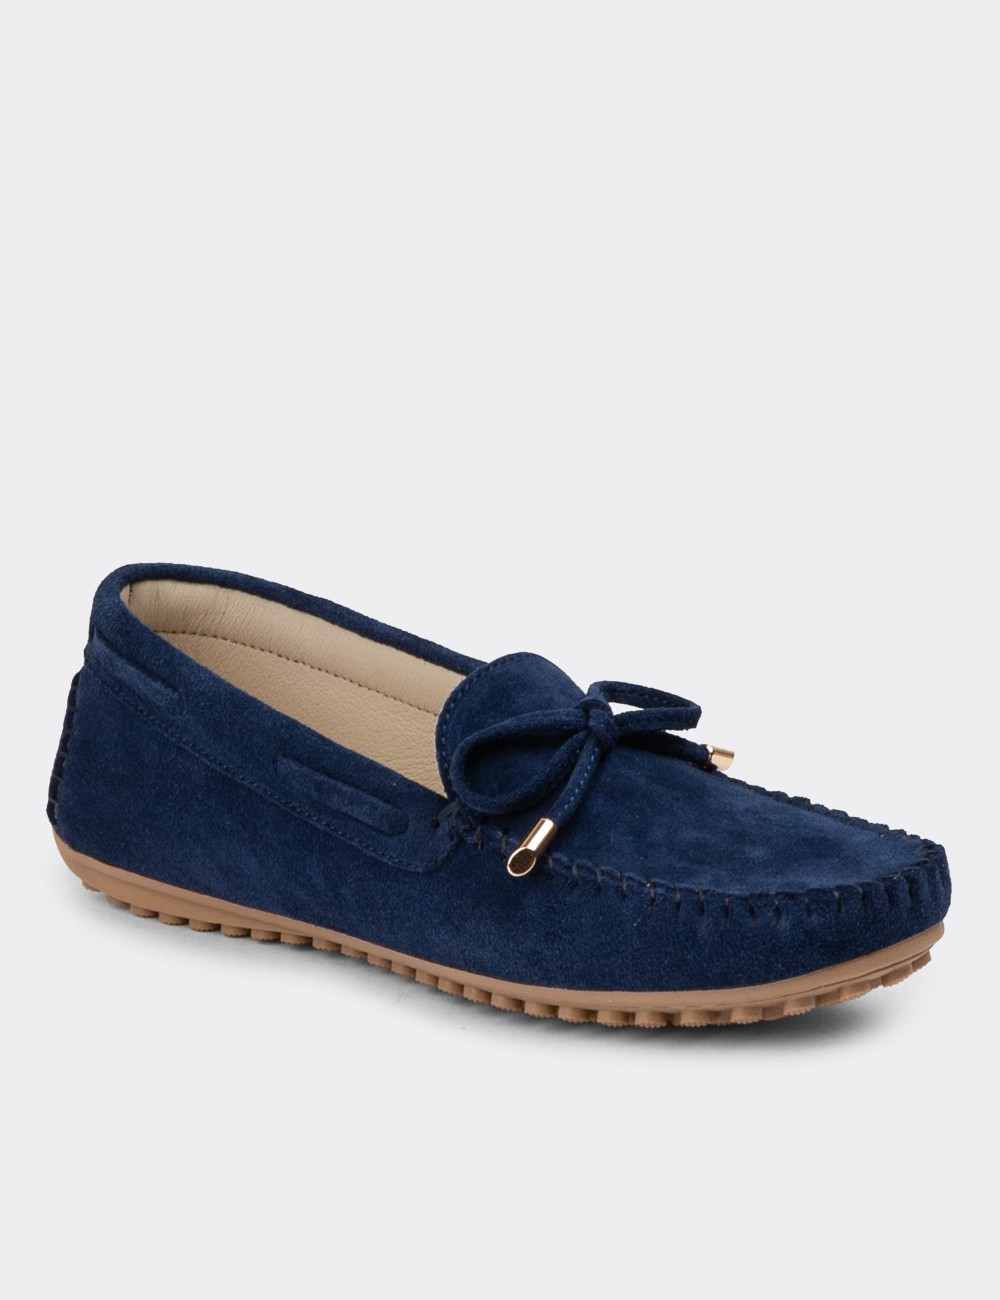 Navy Suede Leather Driving Shoes - SW101ZLCVC01